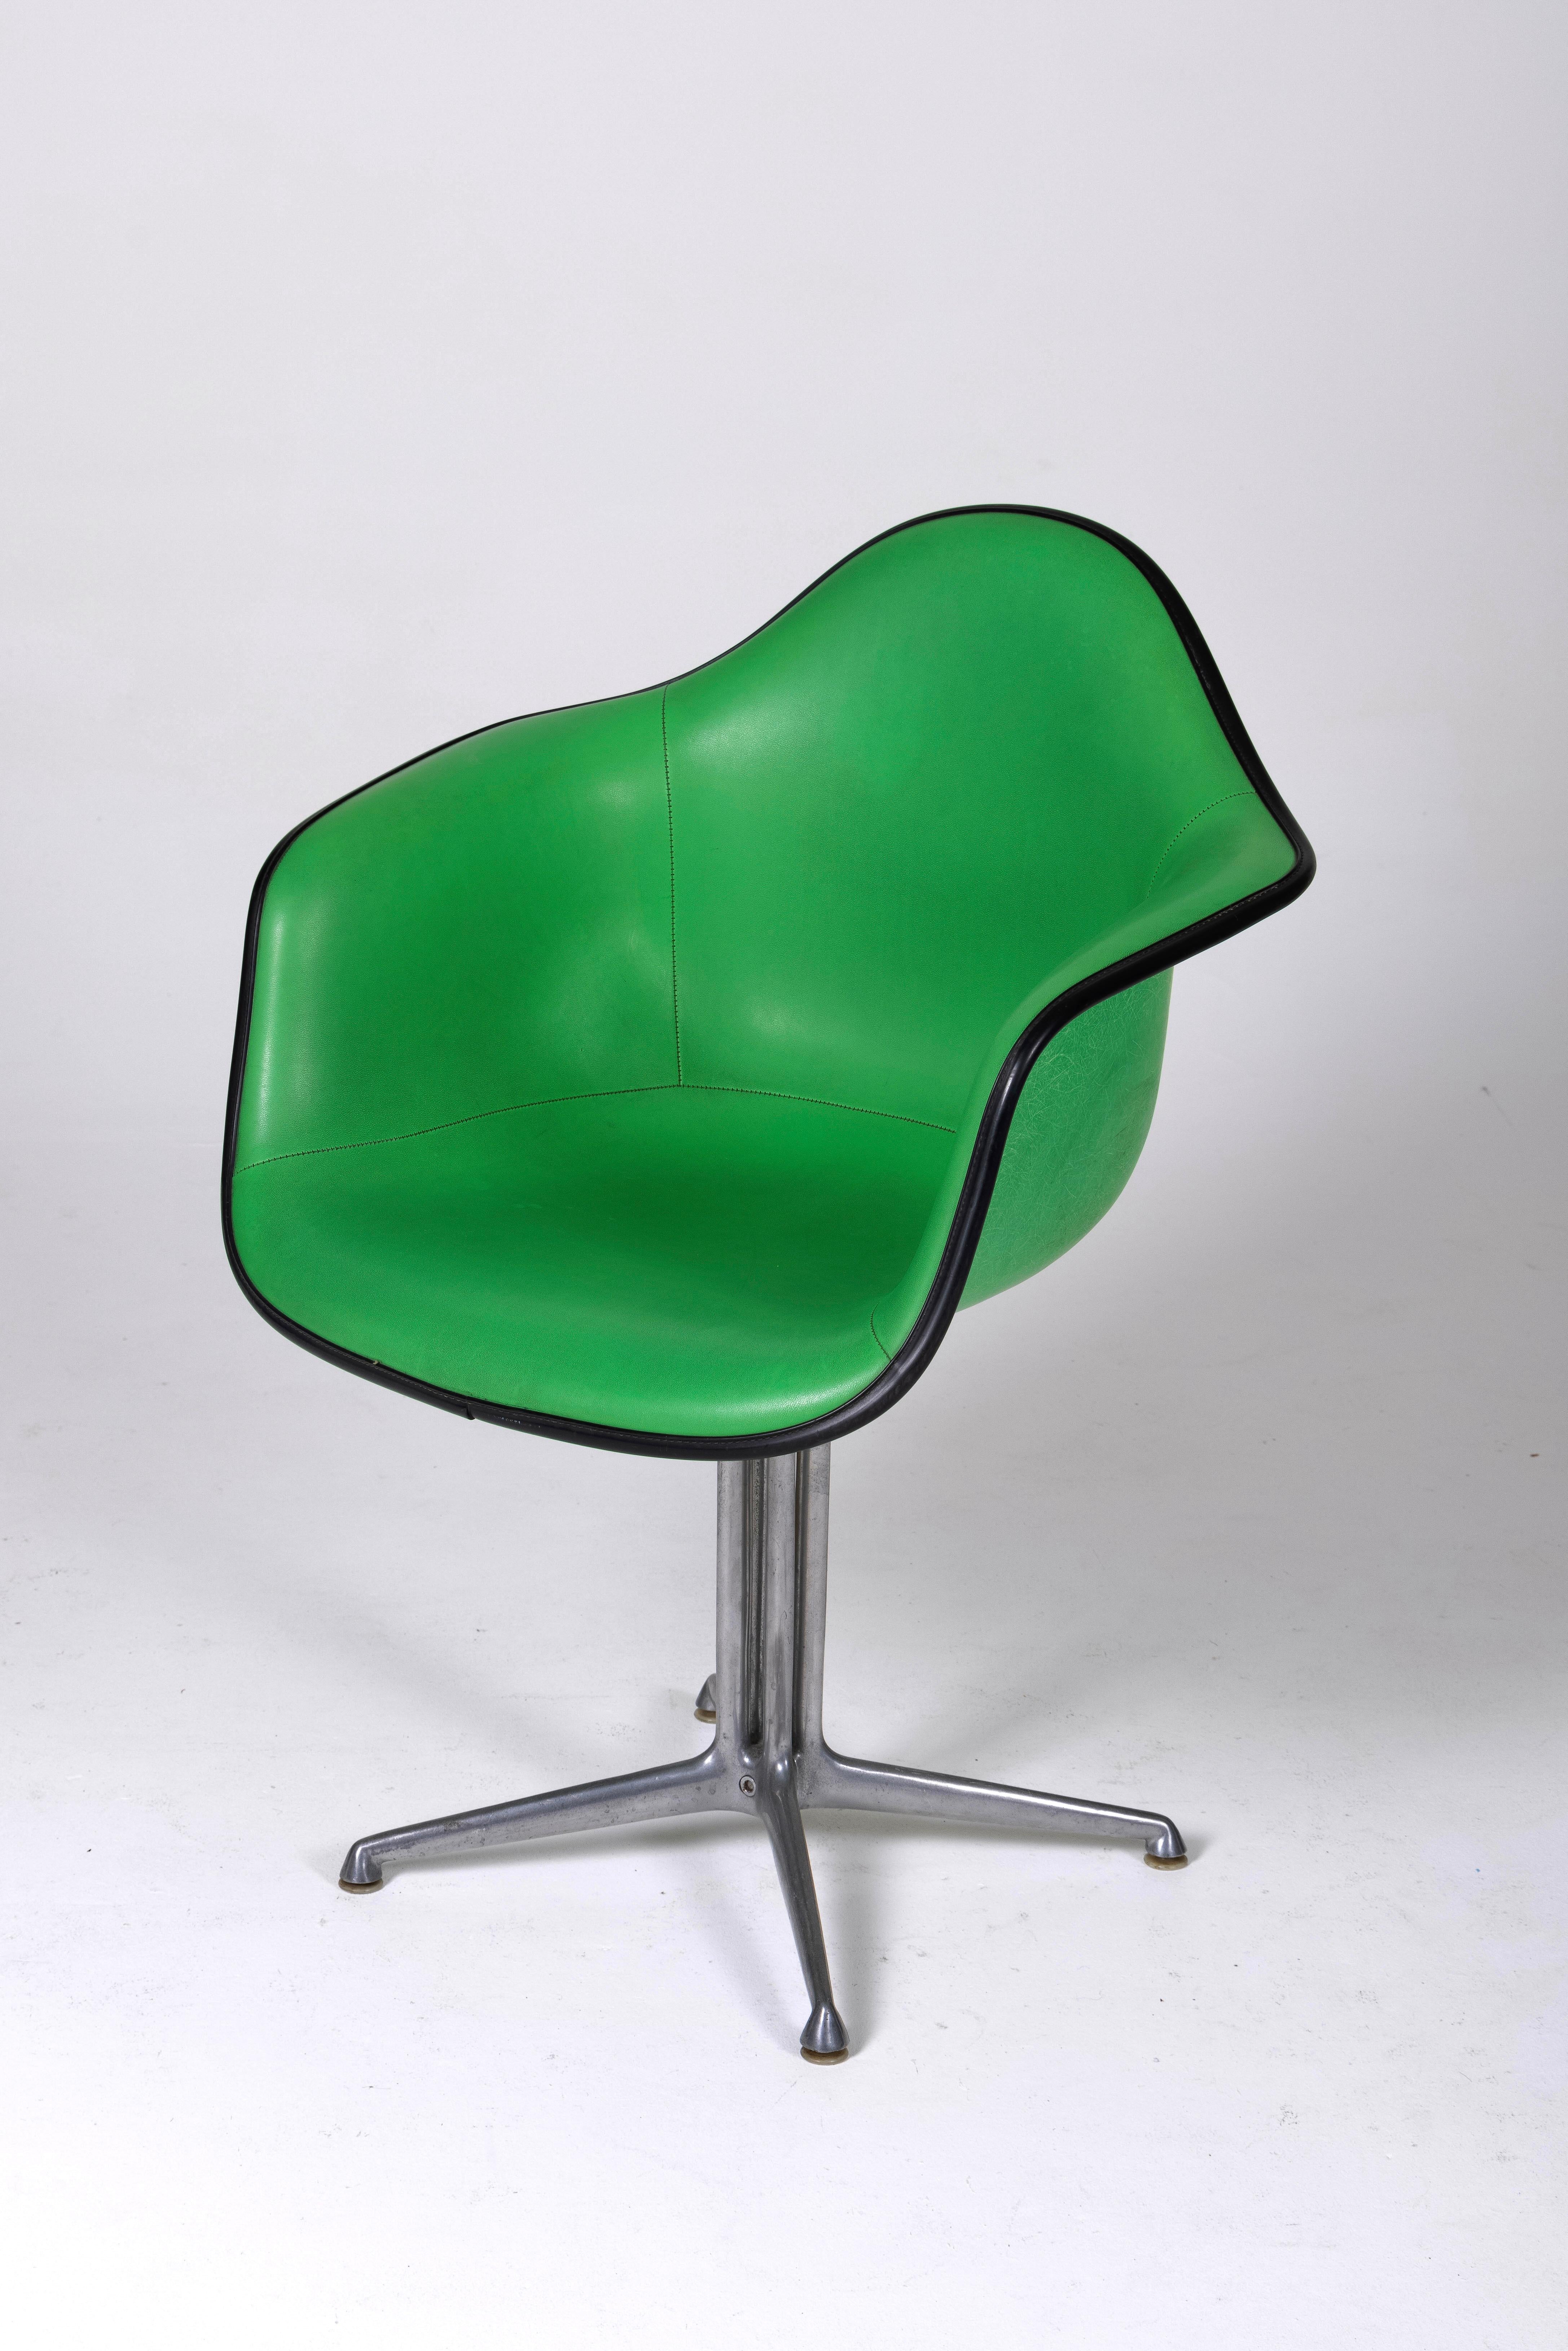 Iconic 'Eames Plastic Chair' by Charles and Ray Eames from the 1950s. This chair, or office chair, features a green leather seat and backrest, with the back of the backrest made of green polymer. The base is made of chromed metal. Scratches are